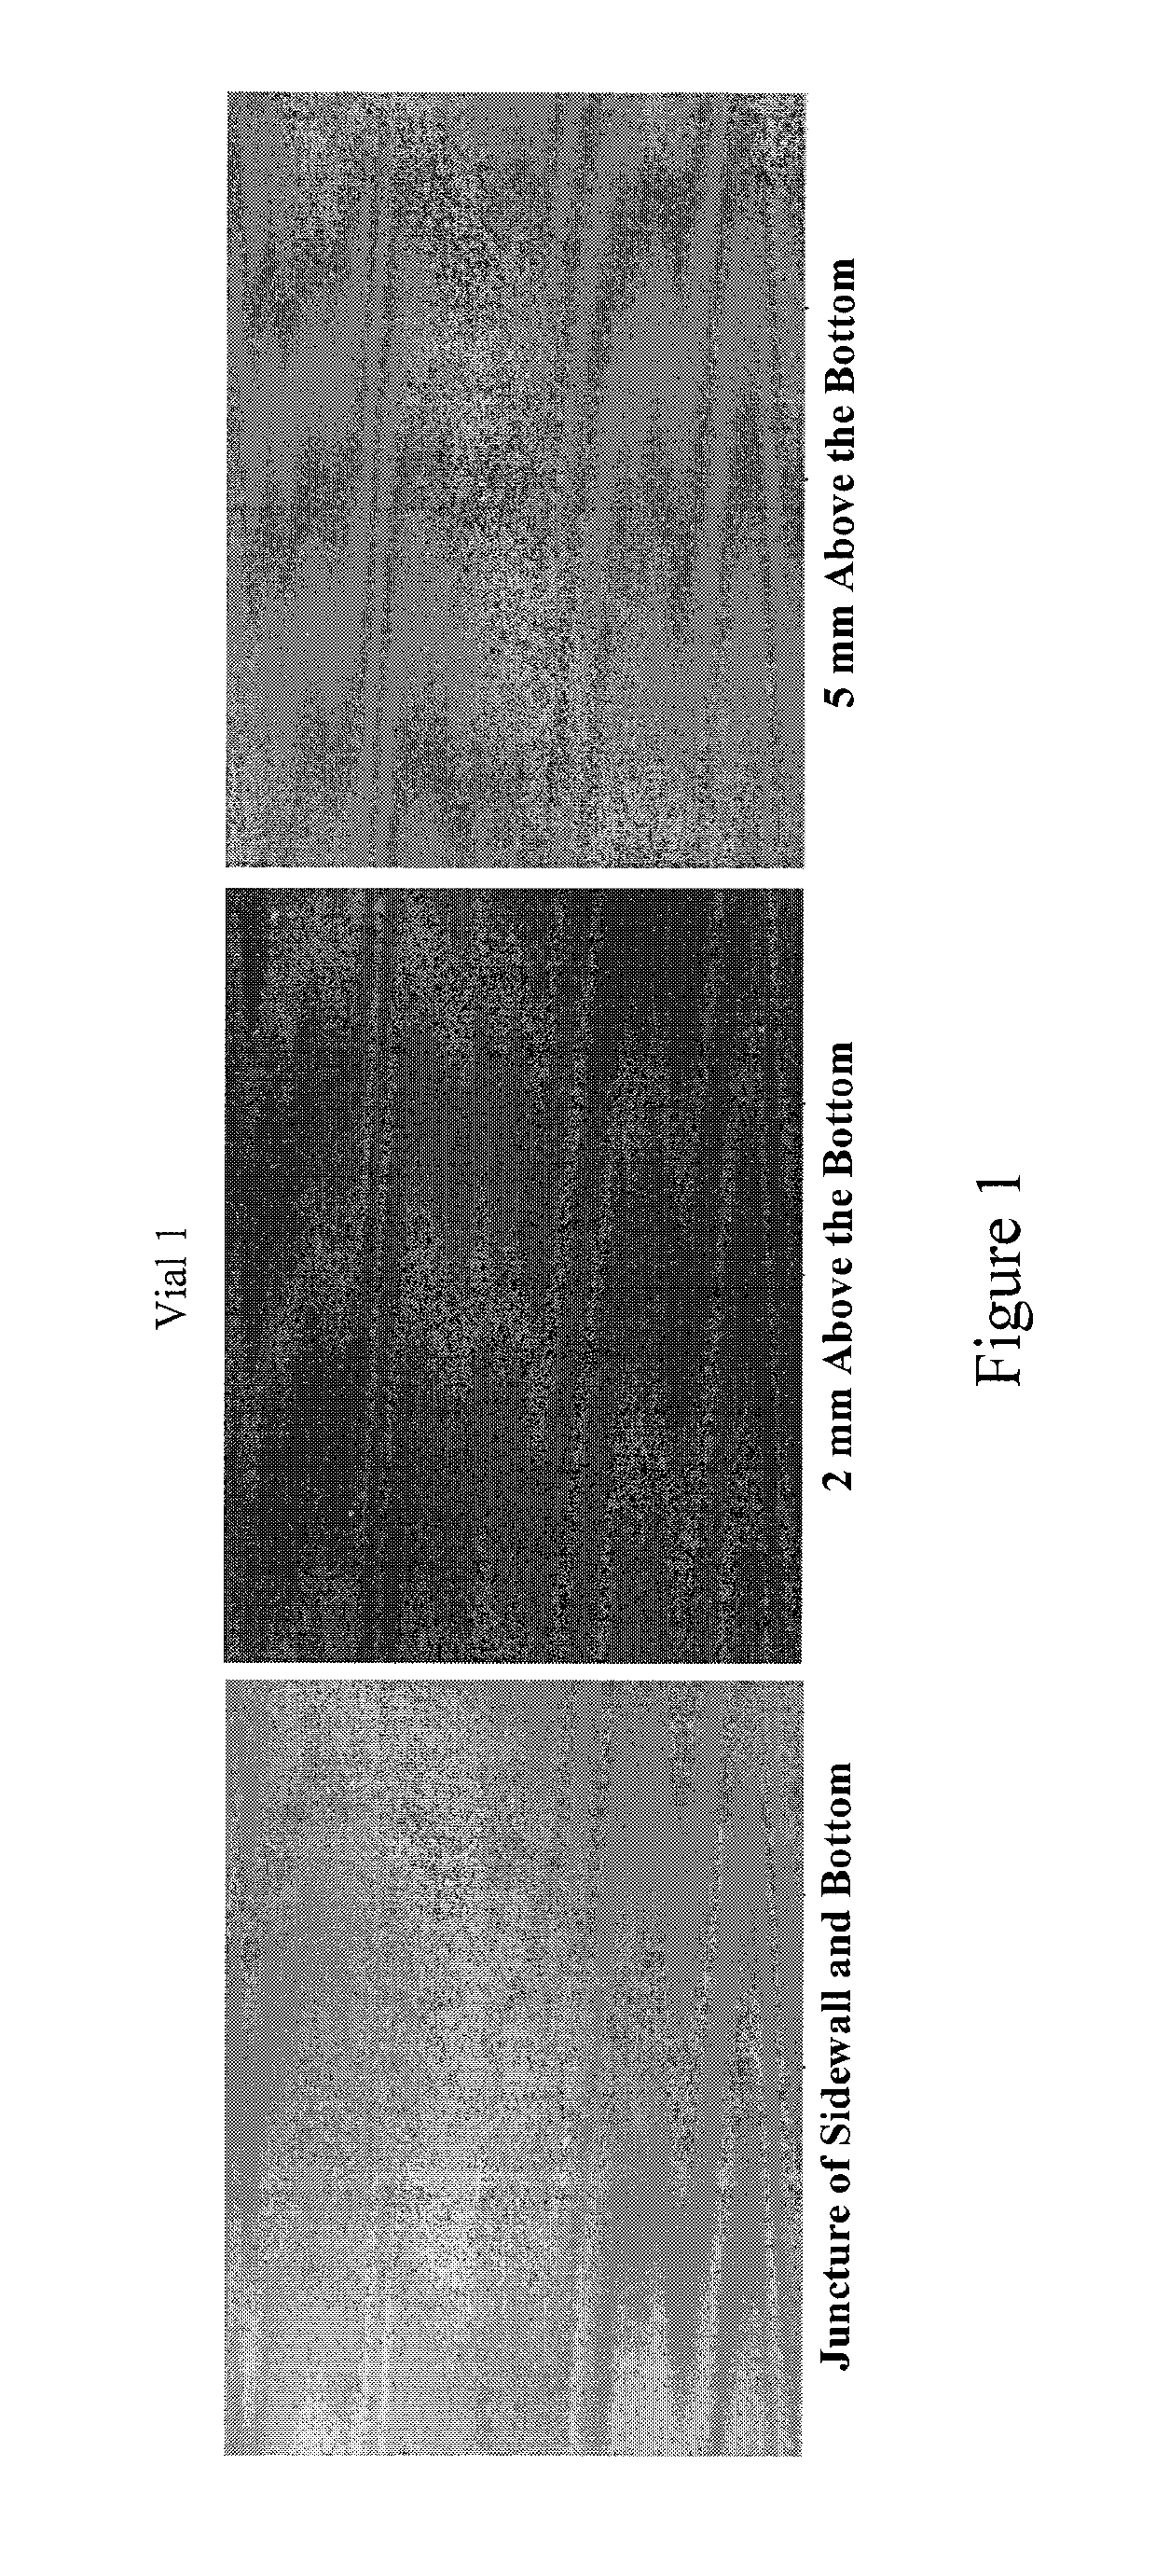 Fused quartz tubing for pharmaceutical packaging and methods for making the same